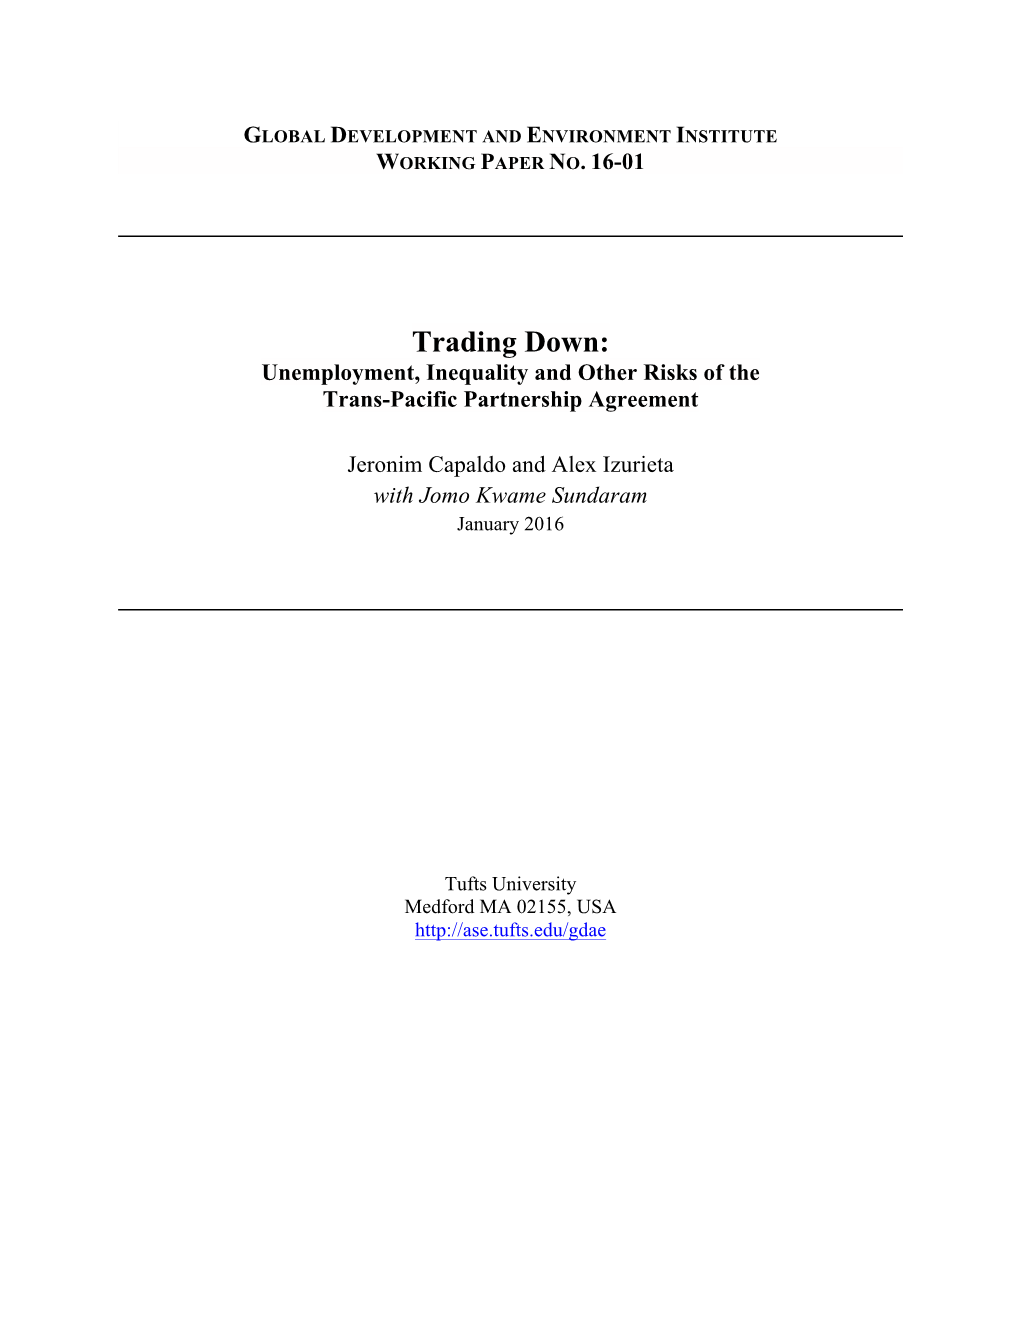 Trading Down: Unemployment, Inequality, and Other Risks of The